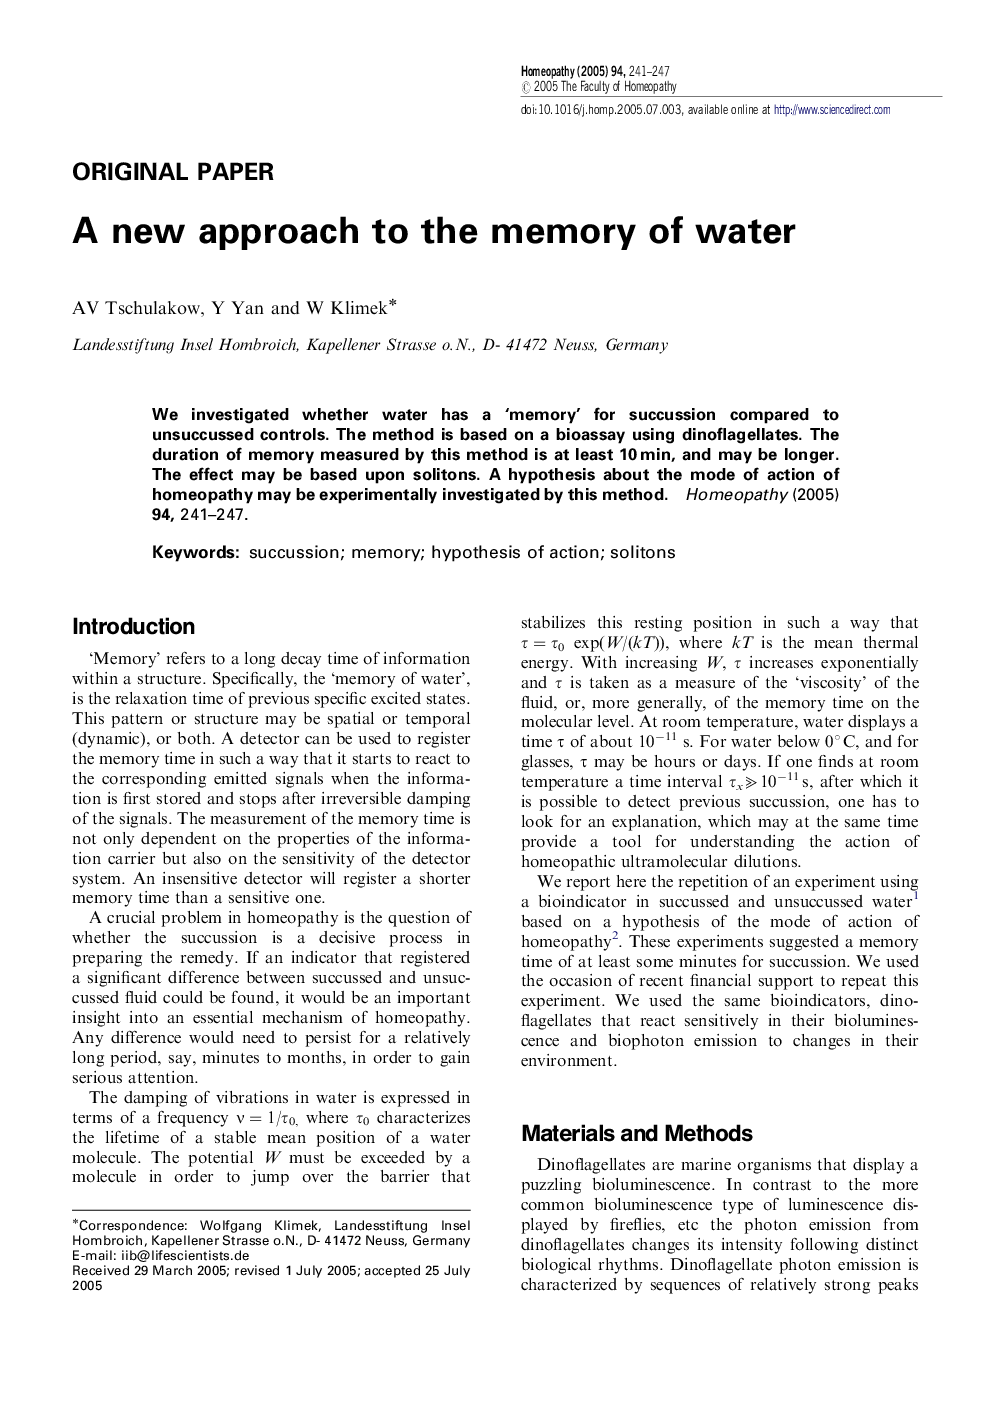 A new approach to the memory of water